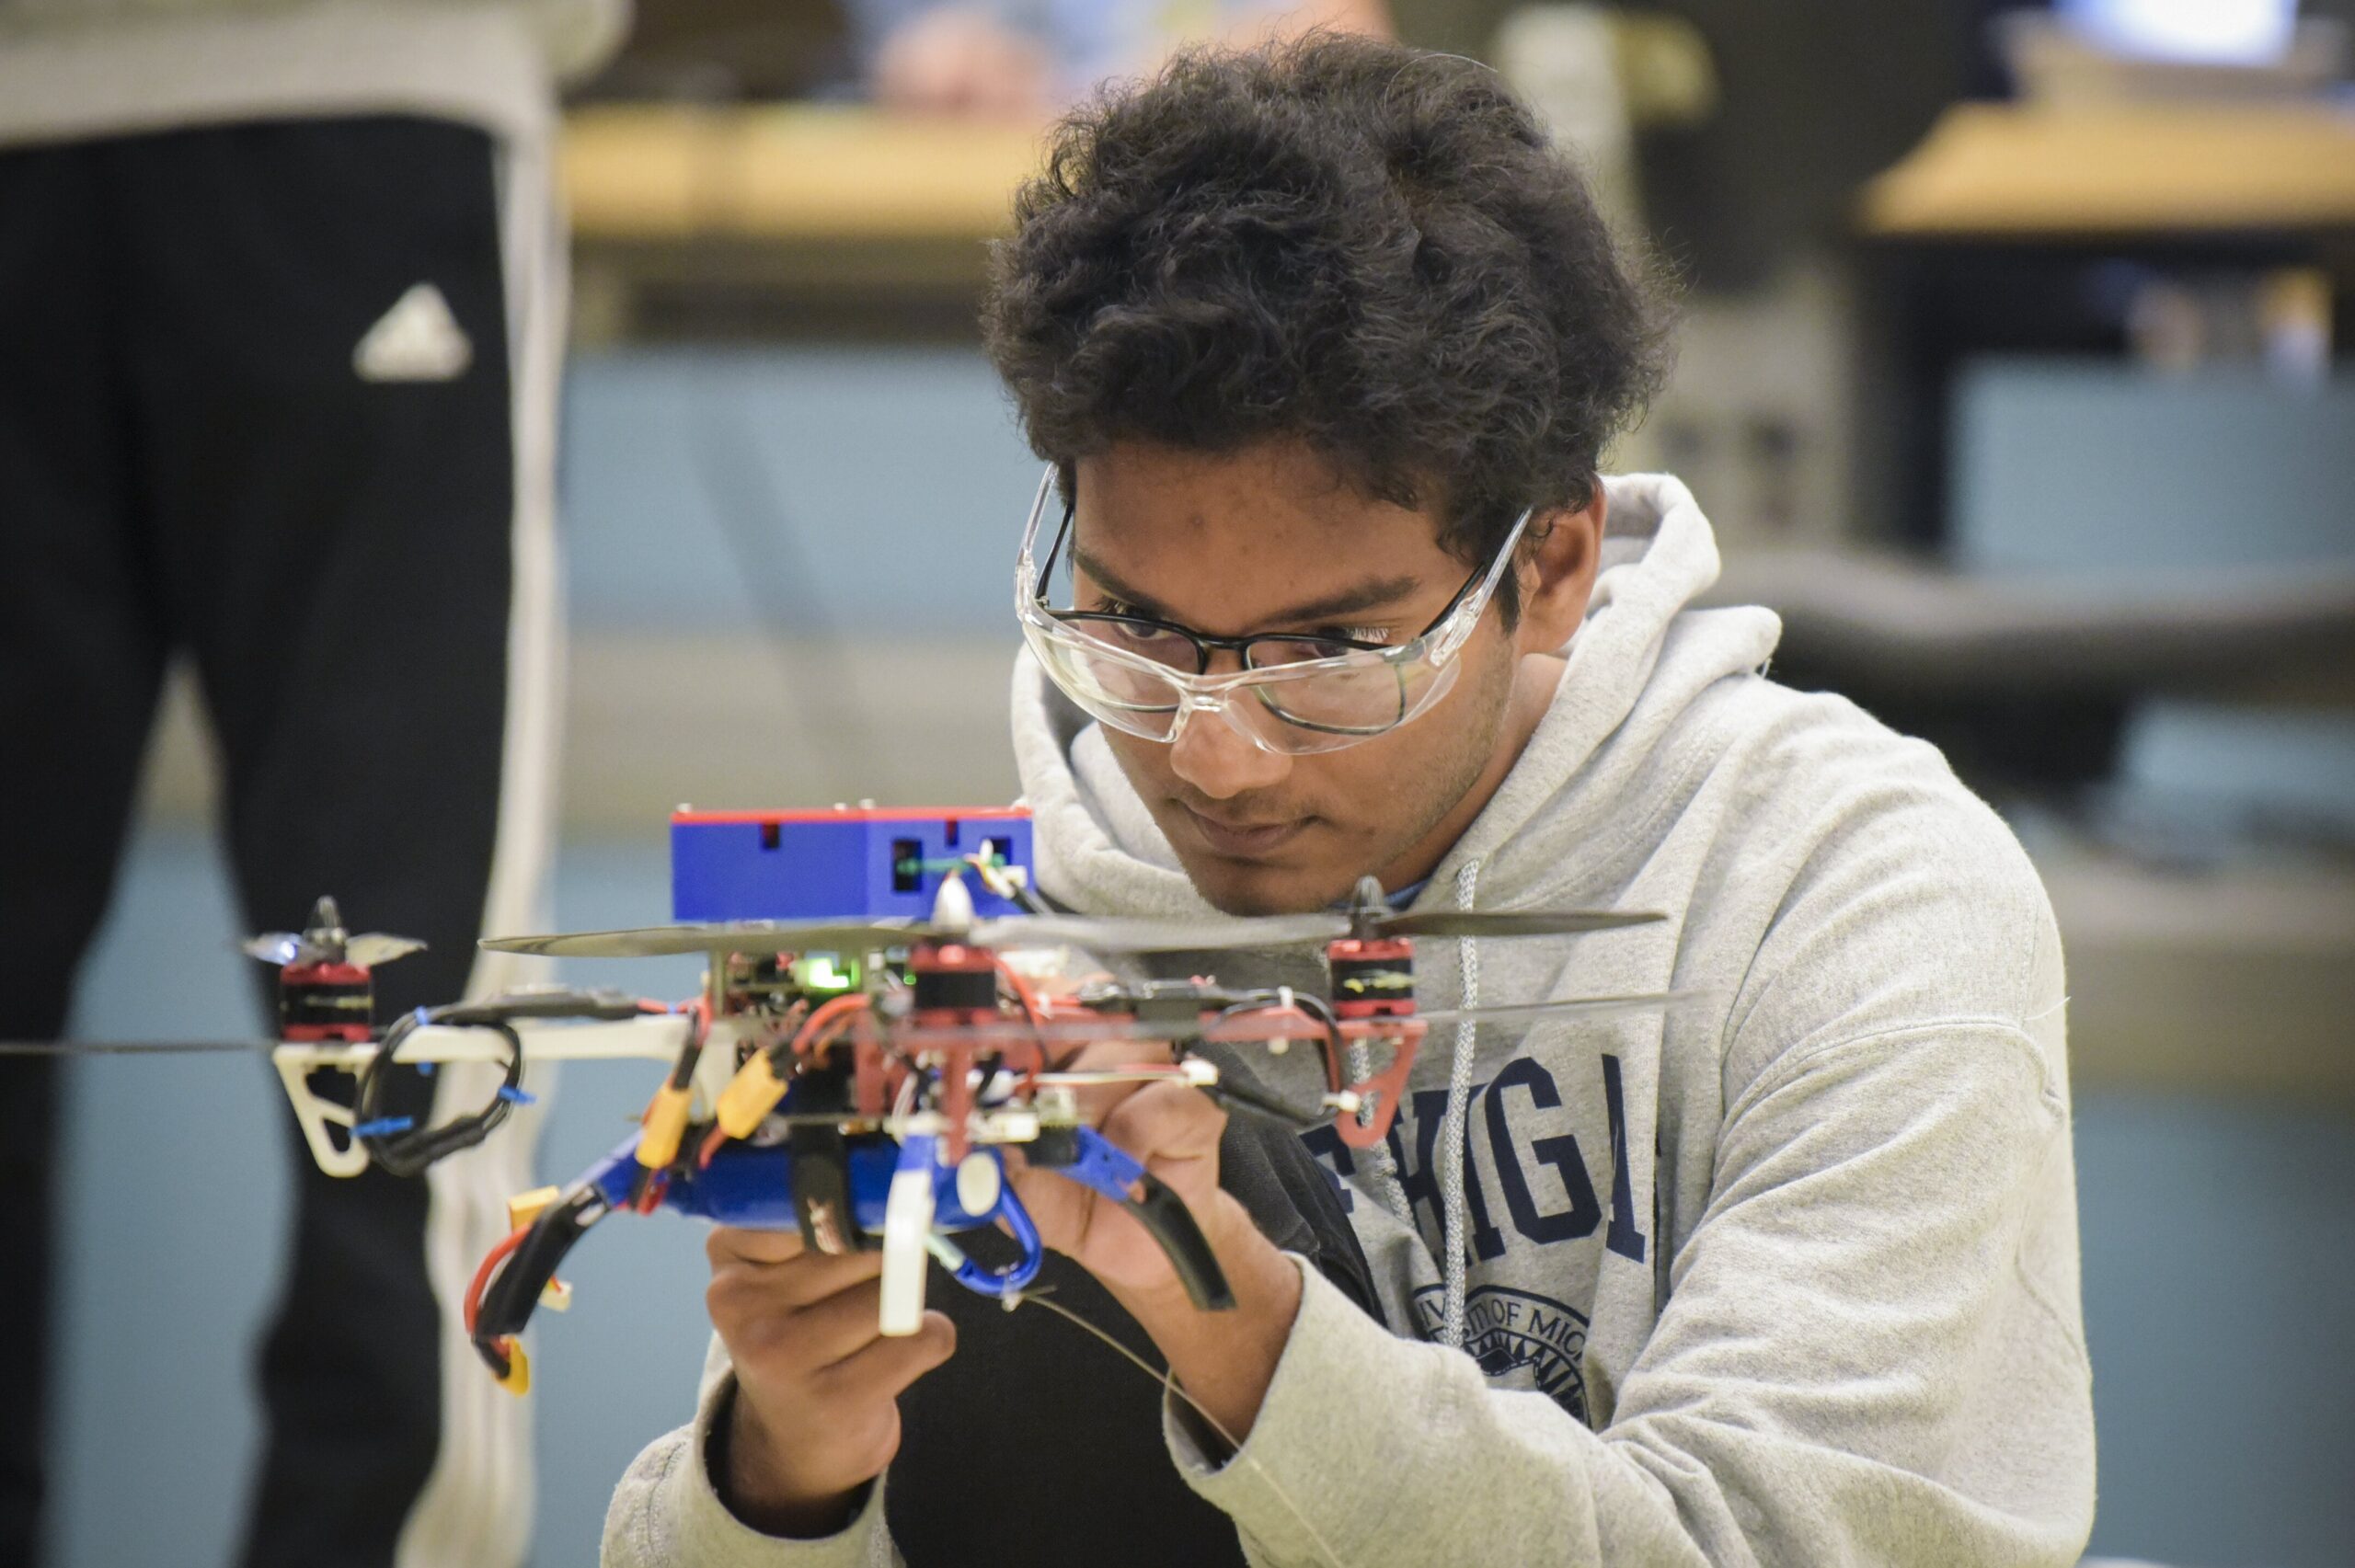 Student in goggles holding drone and adjusting parts